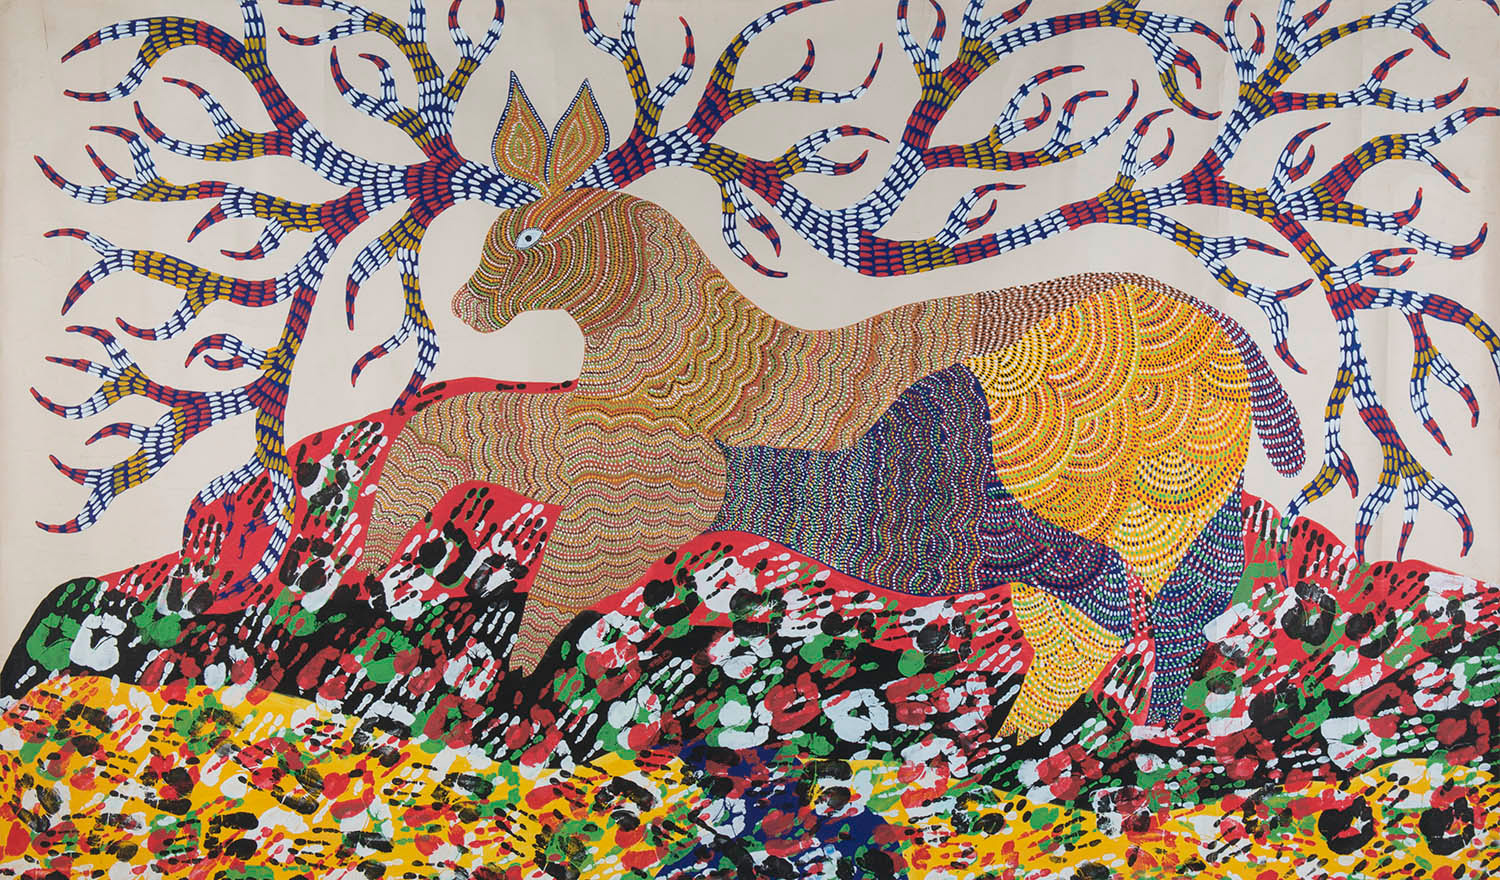 A Gond painting of a large deer with its antlers fanning outwards, placed above a repeating motif of human hands.